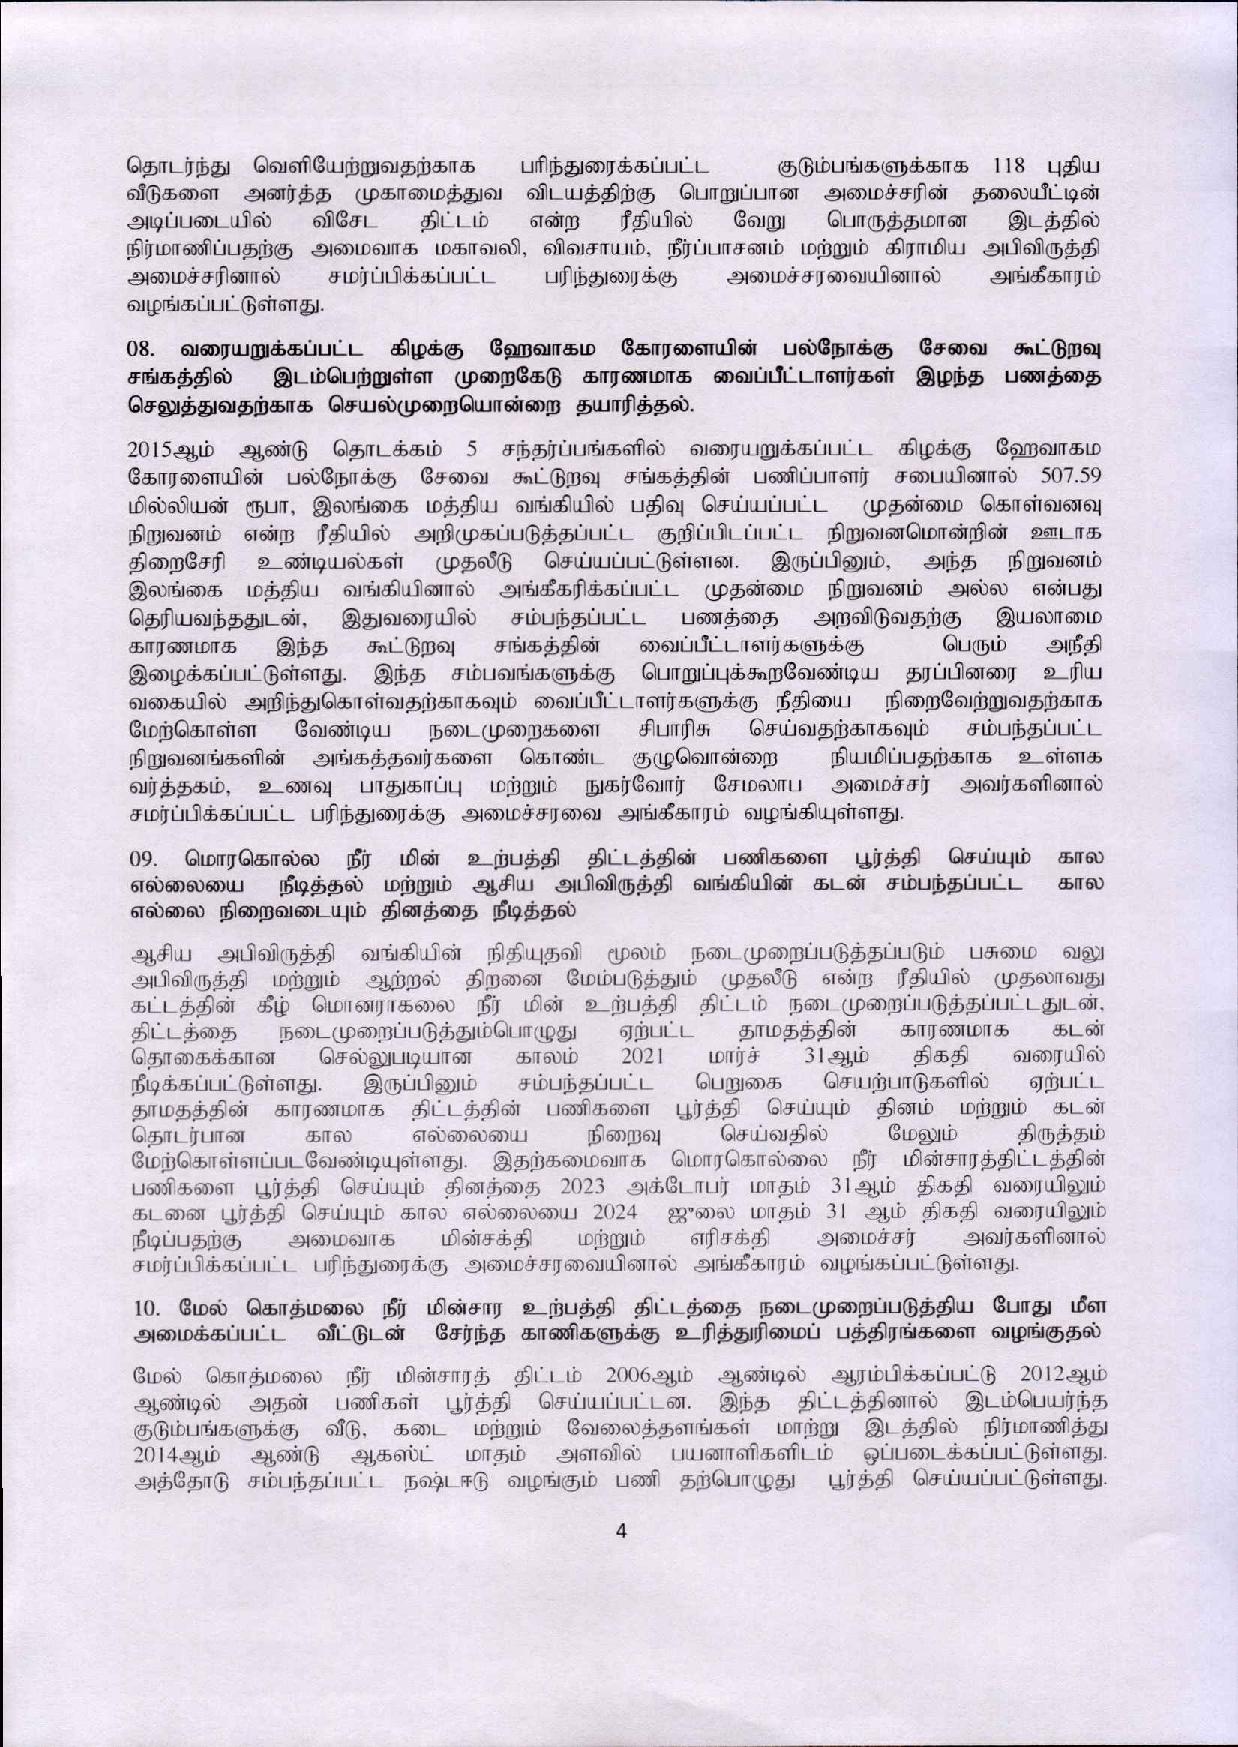 Cabinet Decision on 22.07.2020 Tamil page 004 1